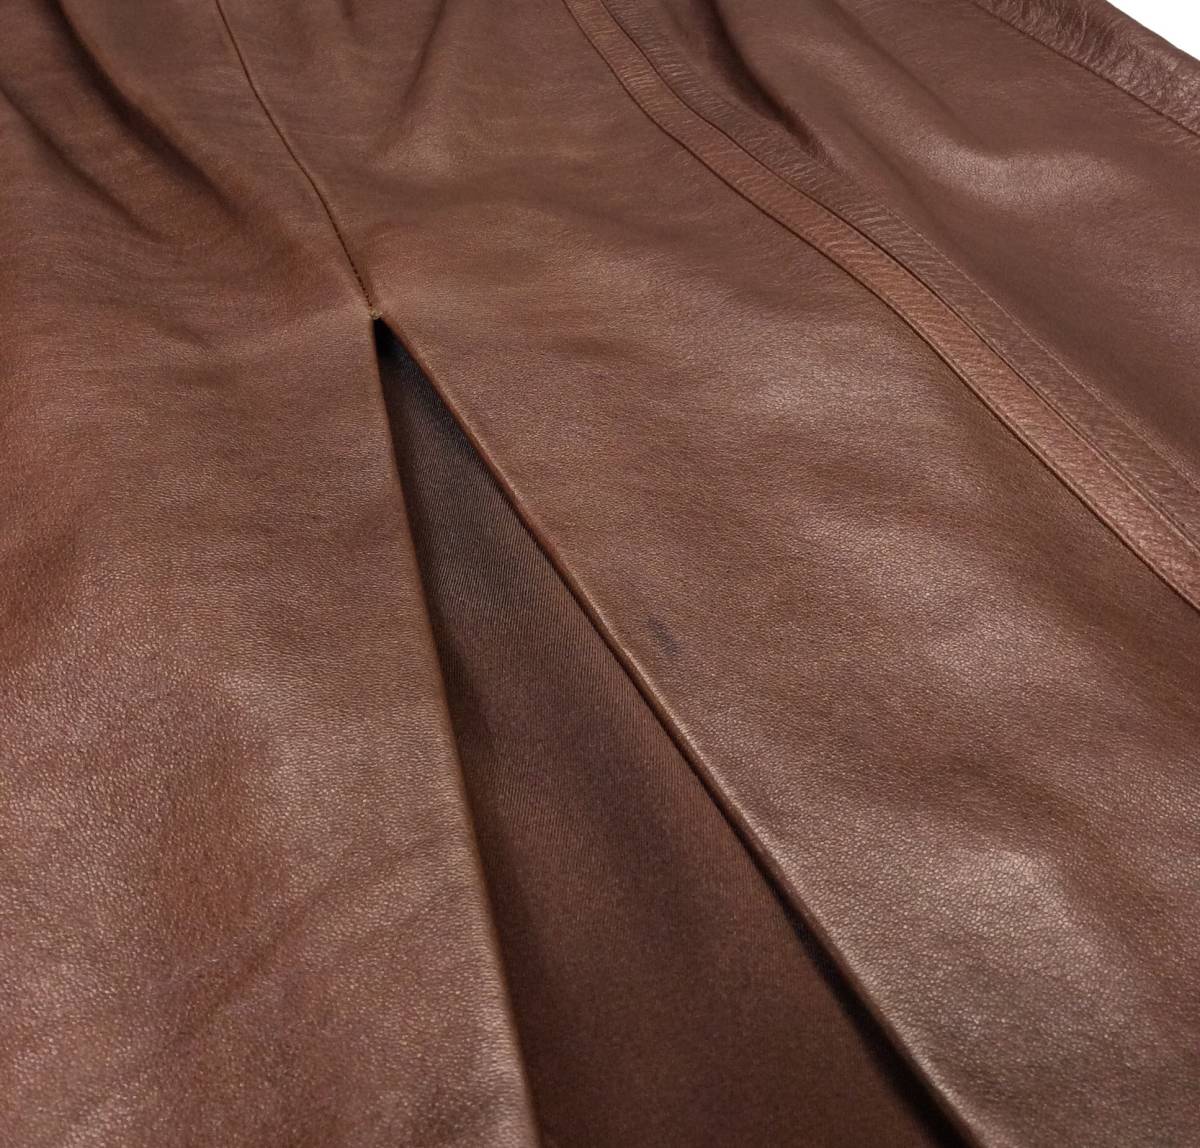 GUCCI Gucci ITALY made sheep leather leather skirt belt attaching Brown tight skirt lady's 42 (ma)